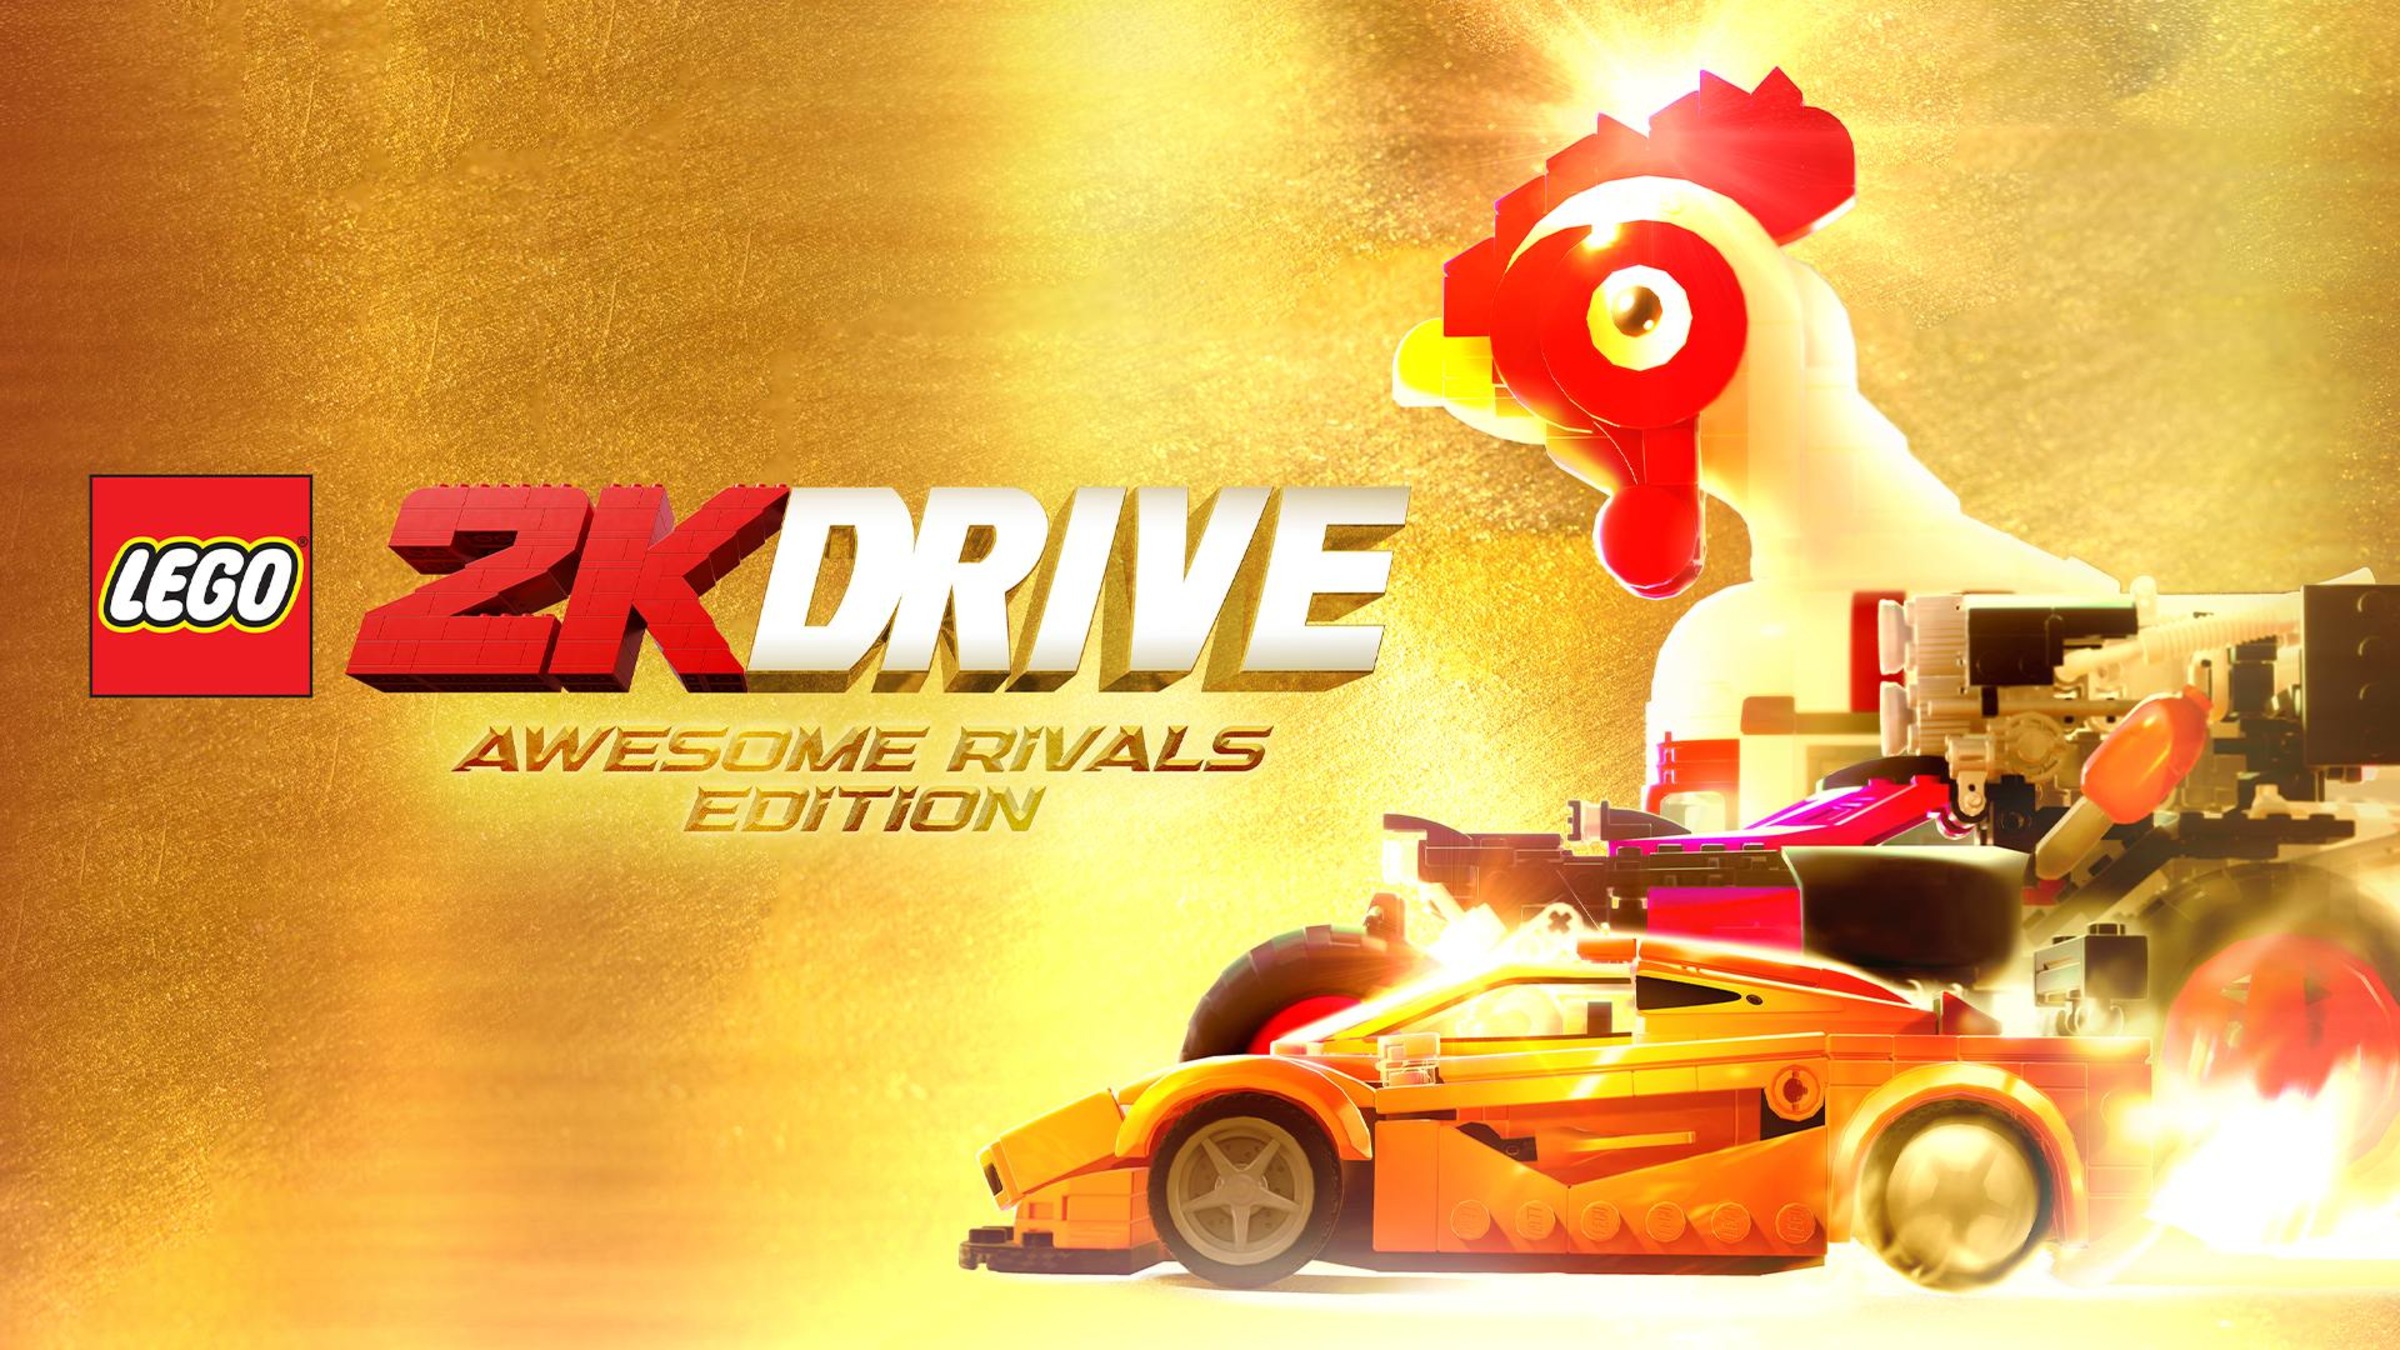 LEGO® 2K Drive Awesome Rivals Edition for Nintendo Switch Nintendo